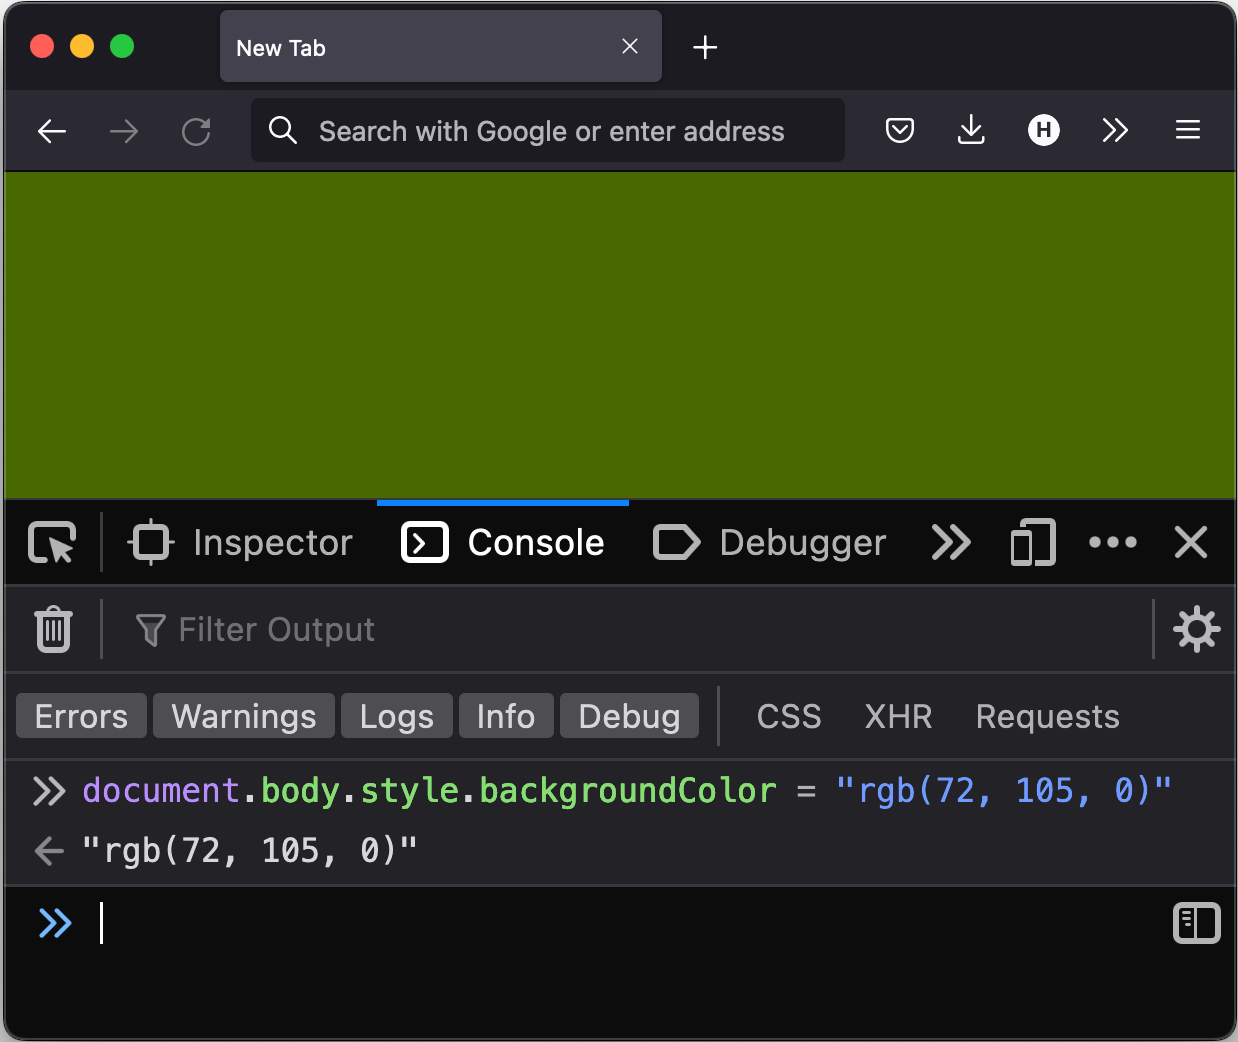 A browser window showing a page with a green background.  The JavaScript console is open, and the following statement has been entered: document.body.style.backgroundColor = "rgb(72, 105, 0)" 